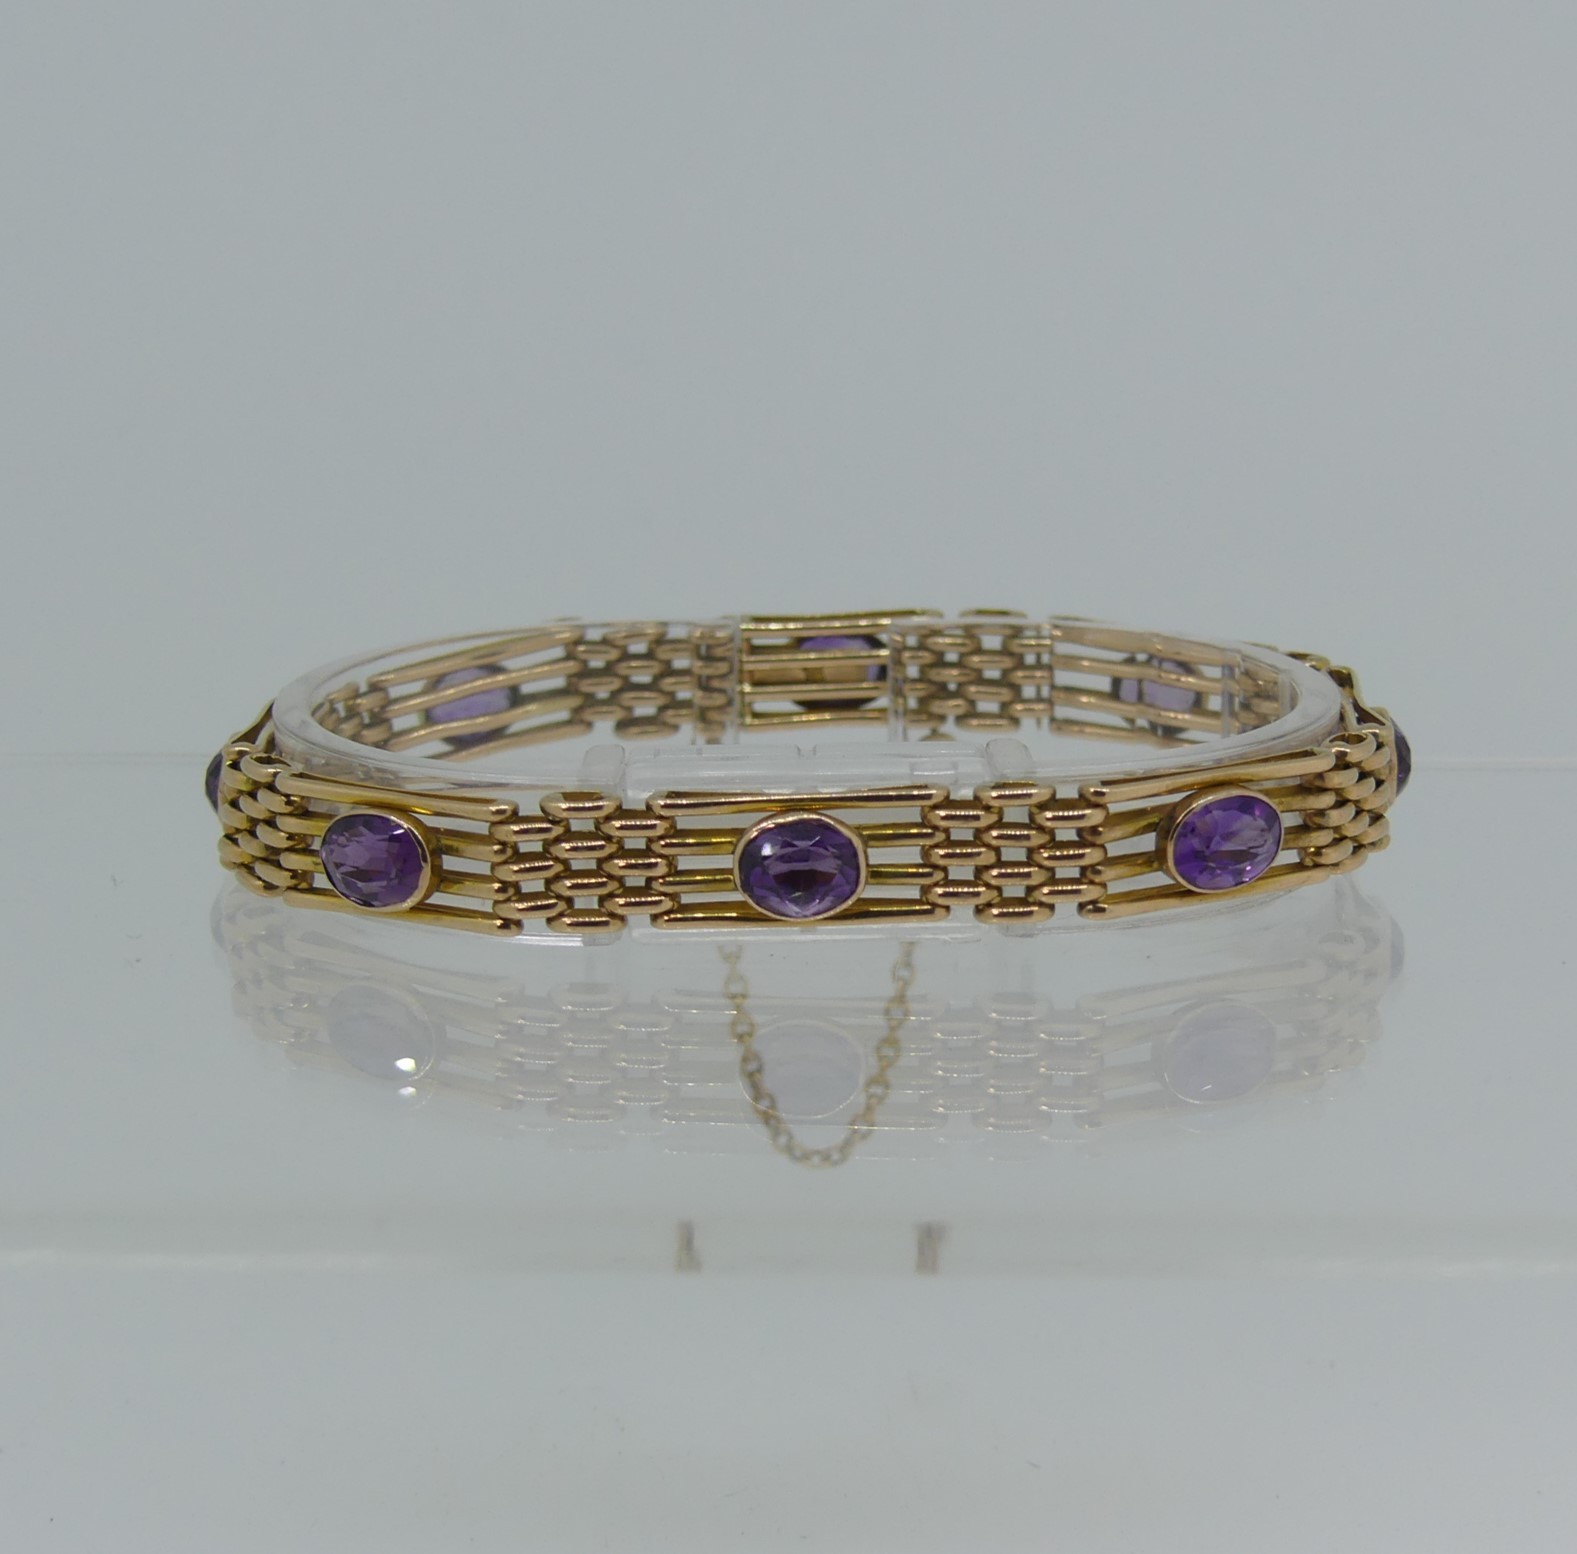 A 9ct yellow gold gatelink Bracelet, set with eight facetted amethysts, one link forming the